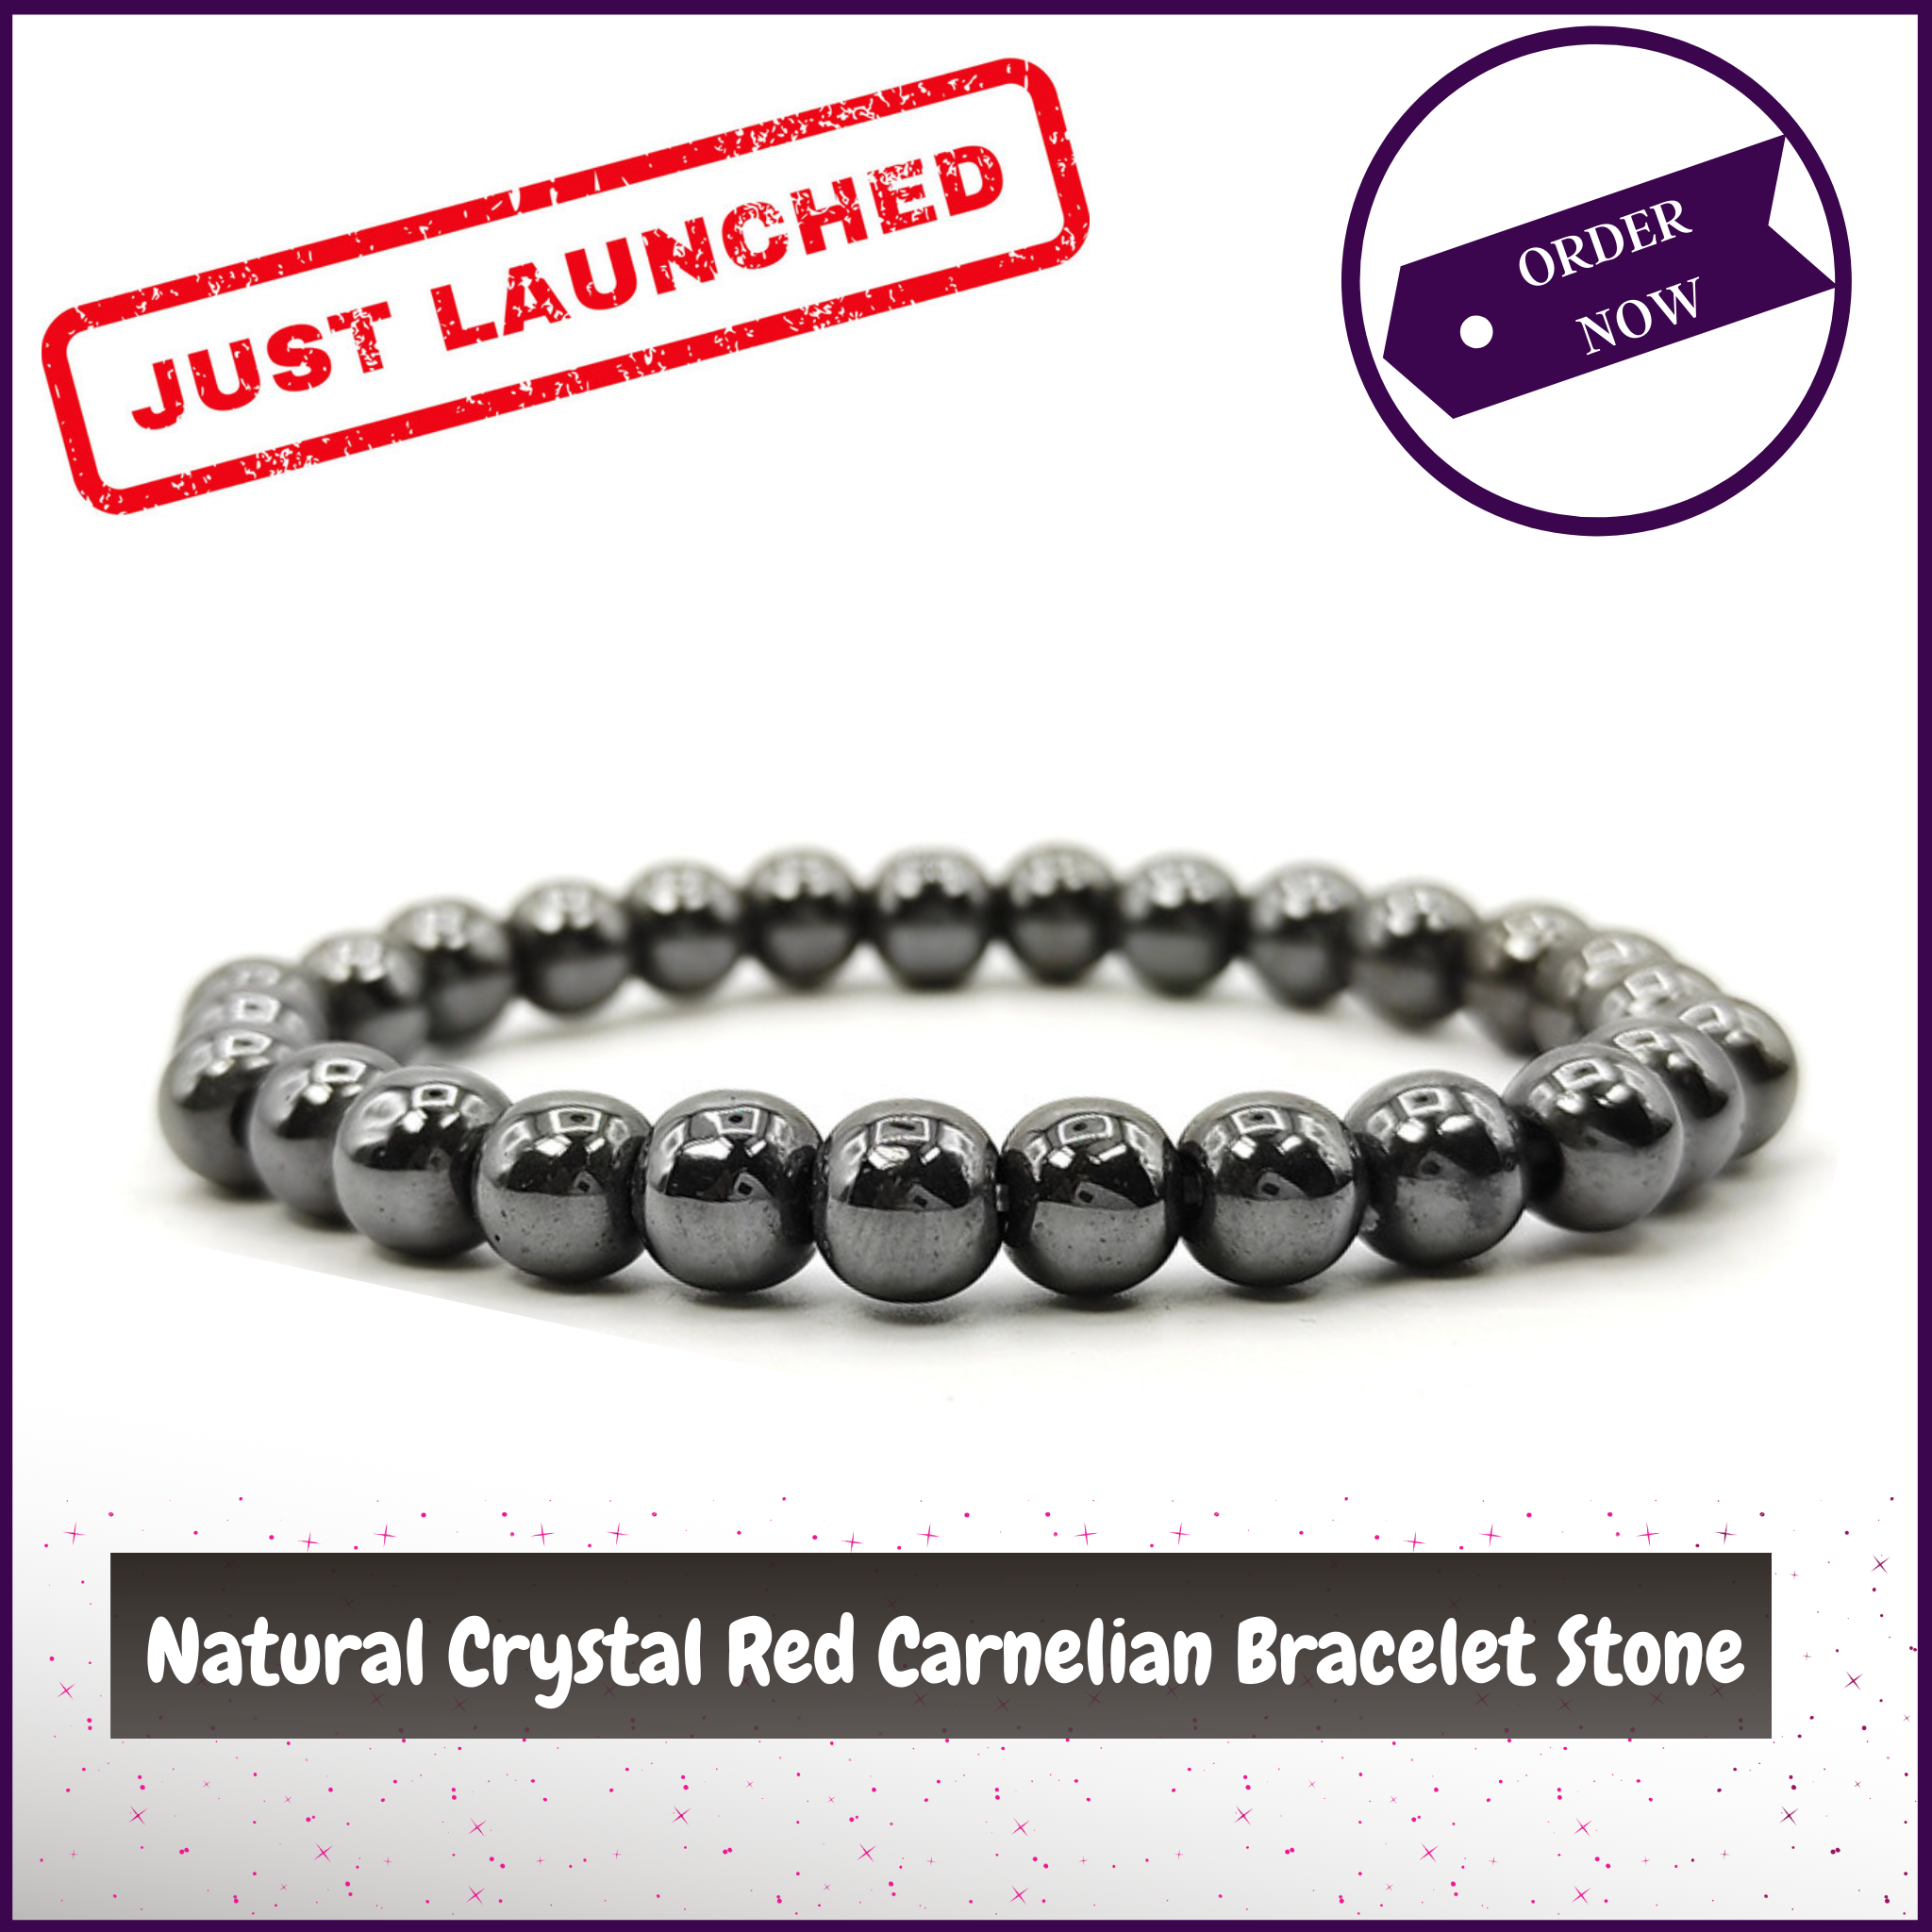 Hematite Bracelet Crystal Stimulates Confidence, Concentration and Focus for students - 51pyramids